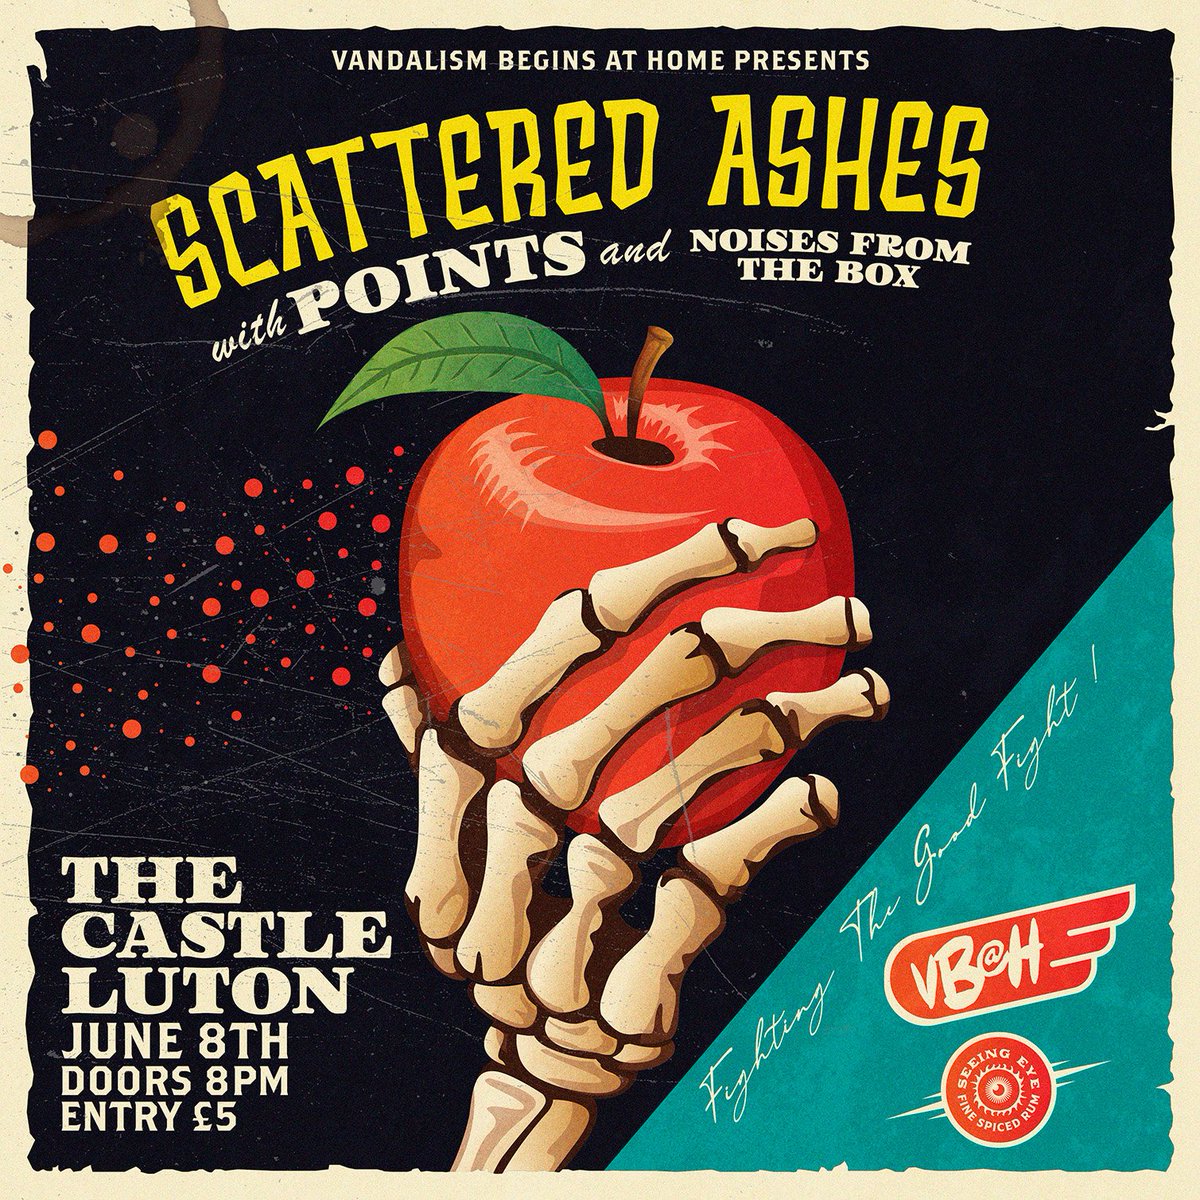 NEW GIG! We are delighted to announce the return of the mighty @SCATTEREDASHES1 - the hotly tipped post-punkers will be gracing @TheCastleLive on 8th June with support from the brilliant POINTS & NOISES FROM THE BOX £5 on the door from 8pm See you down the front! VBAH 💀✊🖤